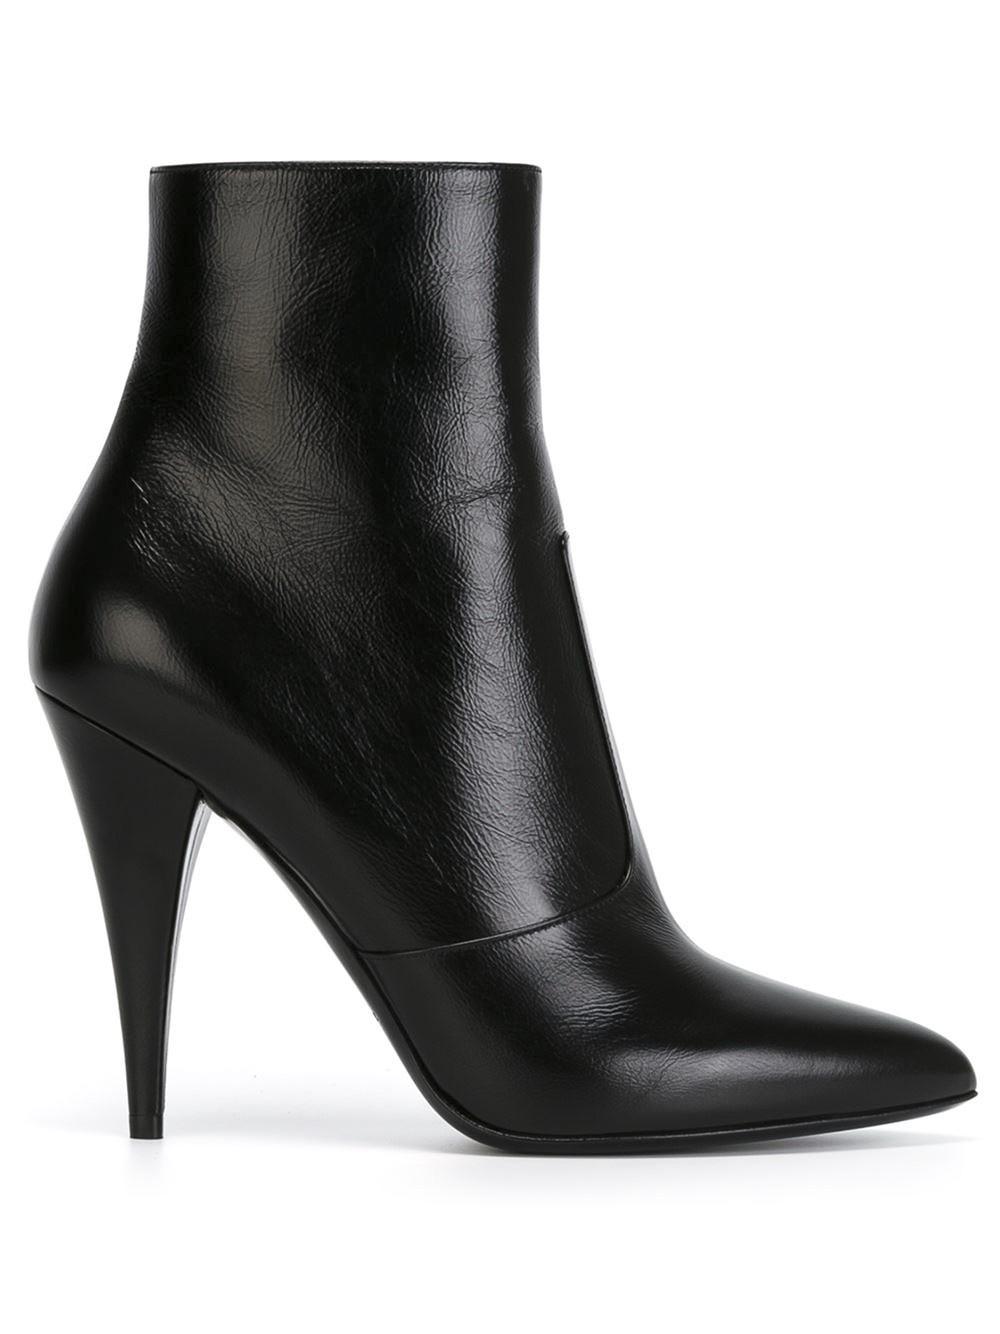 Lyst - Saint Laurent Pointed Toe Ankle Boots in Black